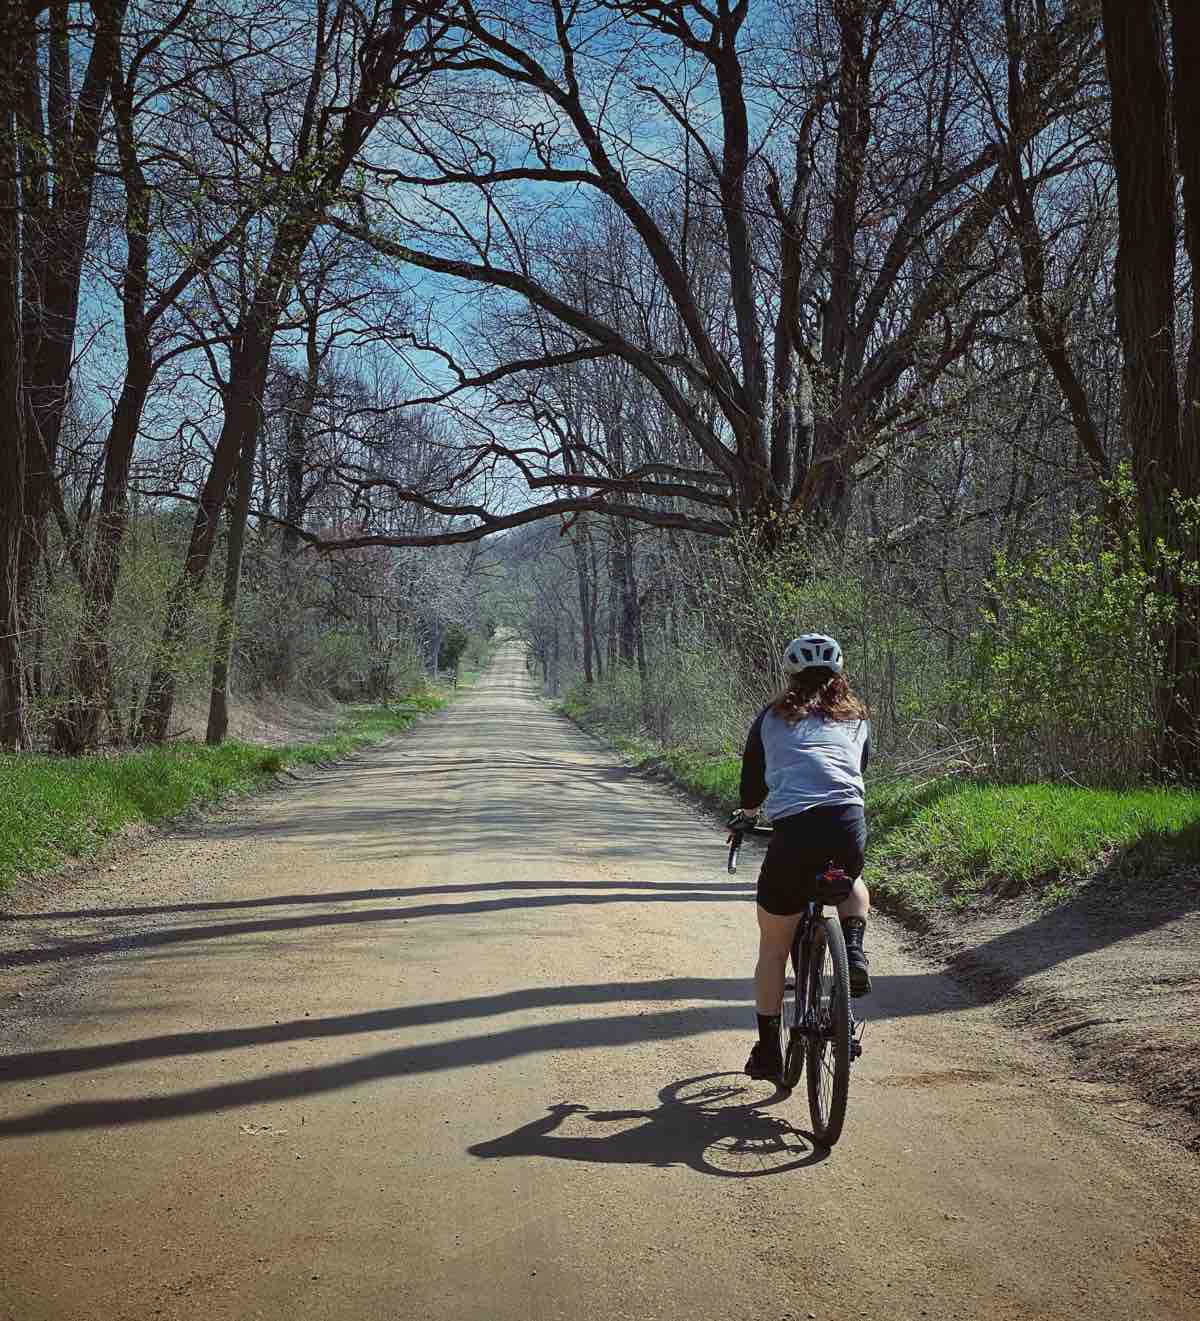 a bicyclist rides on a packed dirt road facing away from the camera. There are trees on either side of the road that are just beginning to leaf out and grass is very green on the edges.